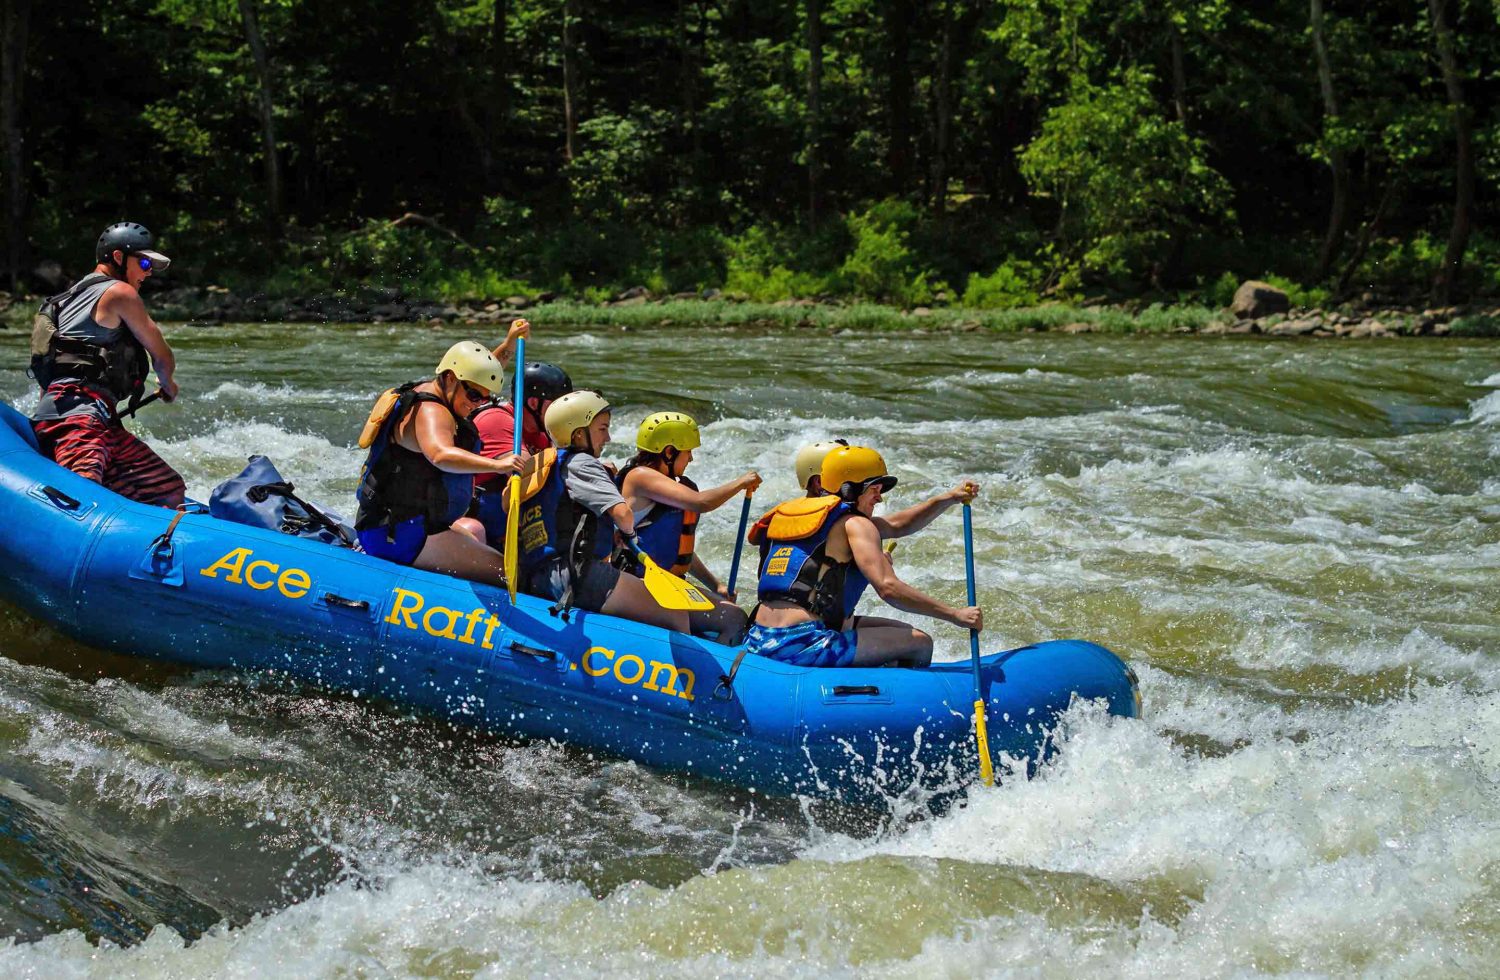 A side view of a rafting running Upper Railroad rapid during a New River Gorge white water rafting trip in West Virginia.